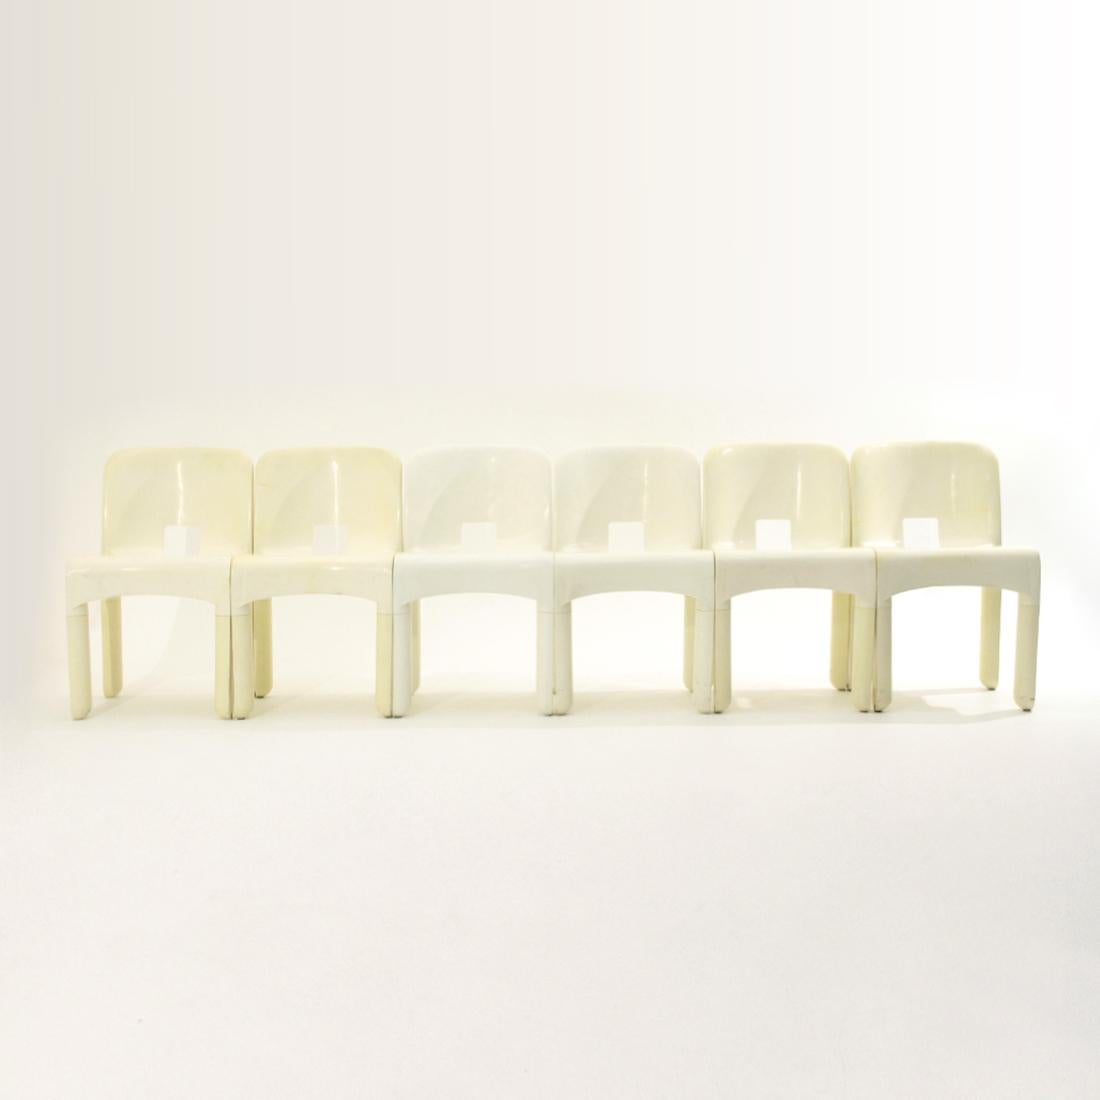 6 “4860” Chairs in White Plastic by Joe Colombo for Kartell, 1960s 1